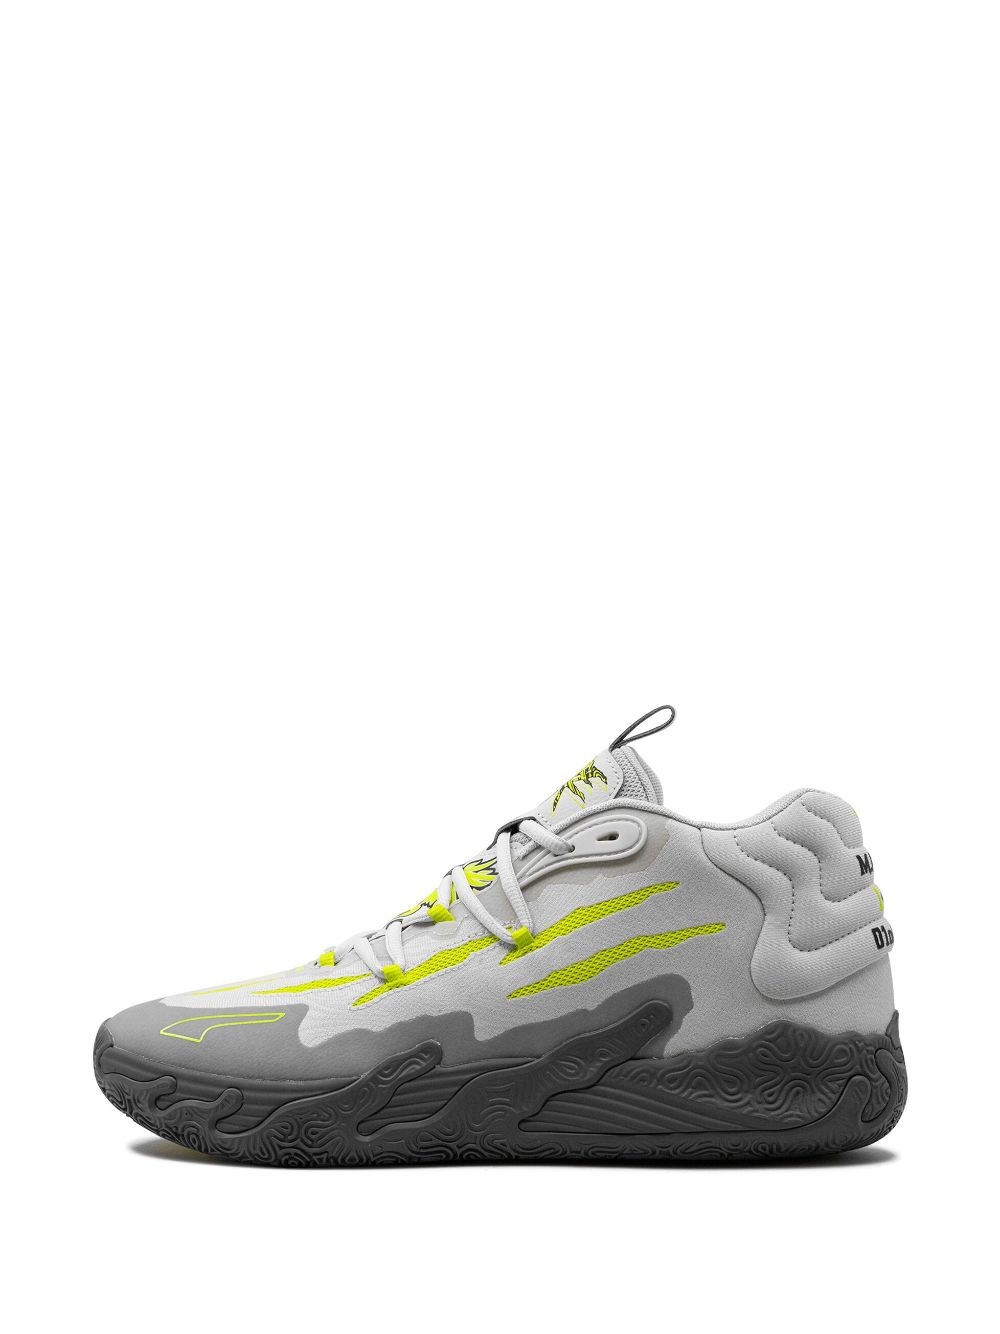 x LaMelo Ball MB.03 "Chino Hills" sneakers - 5